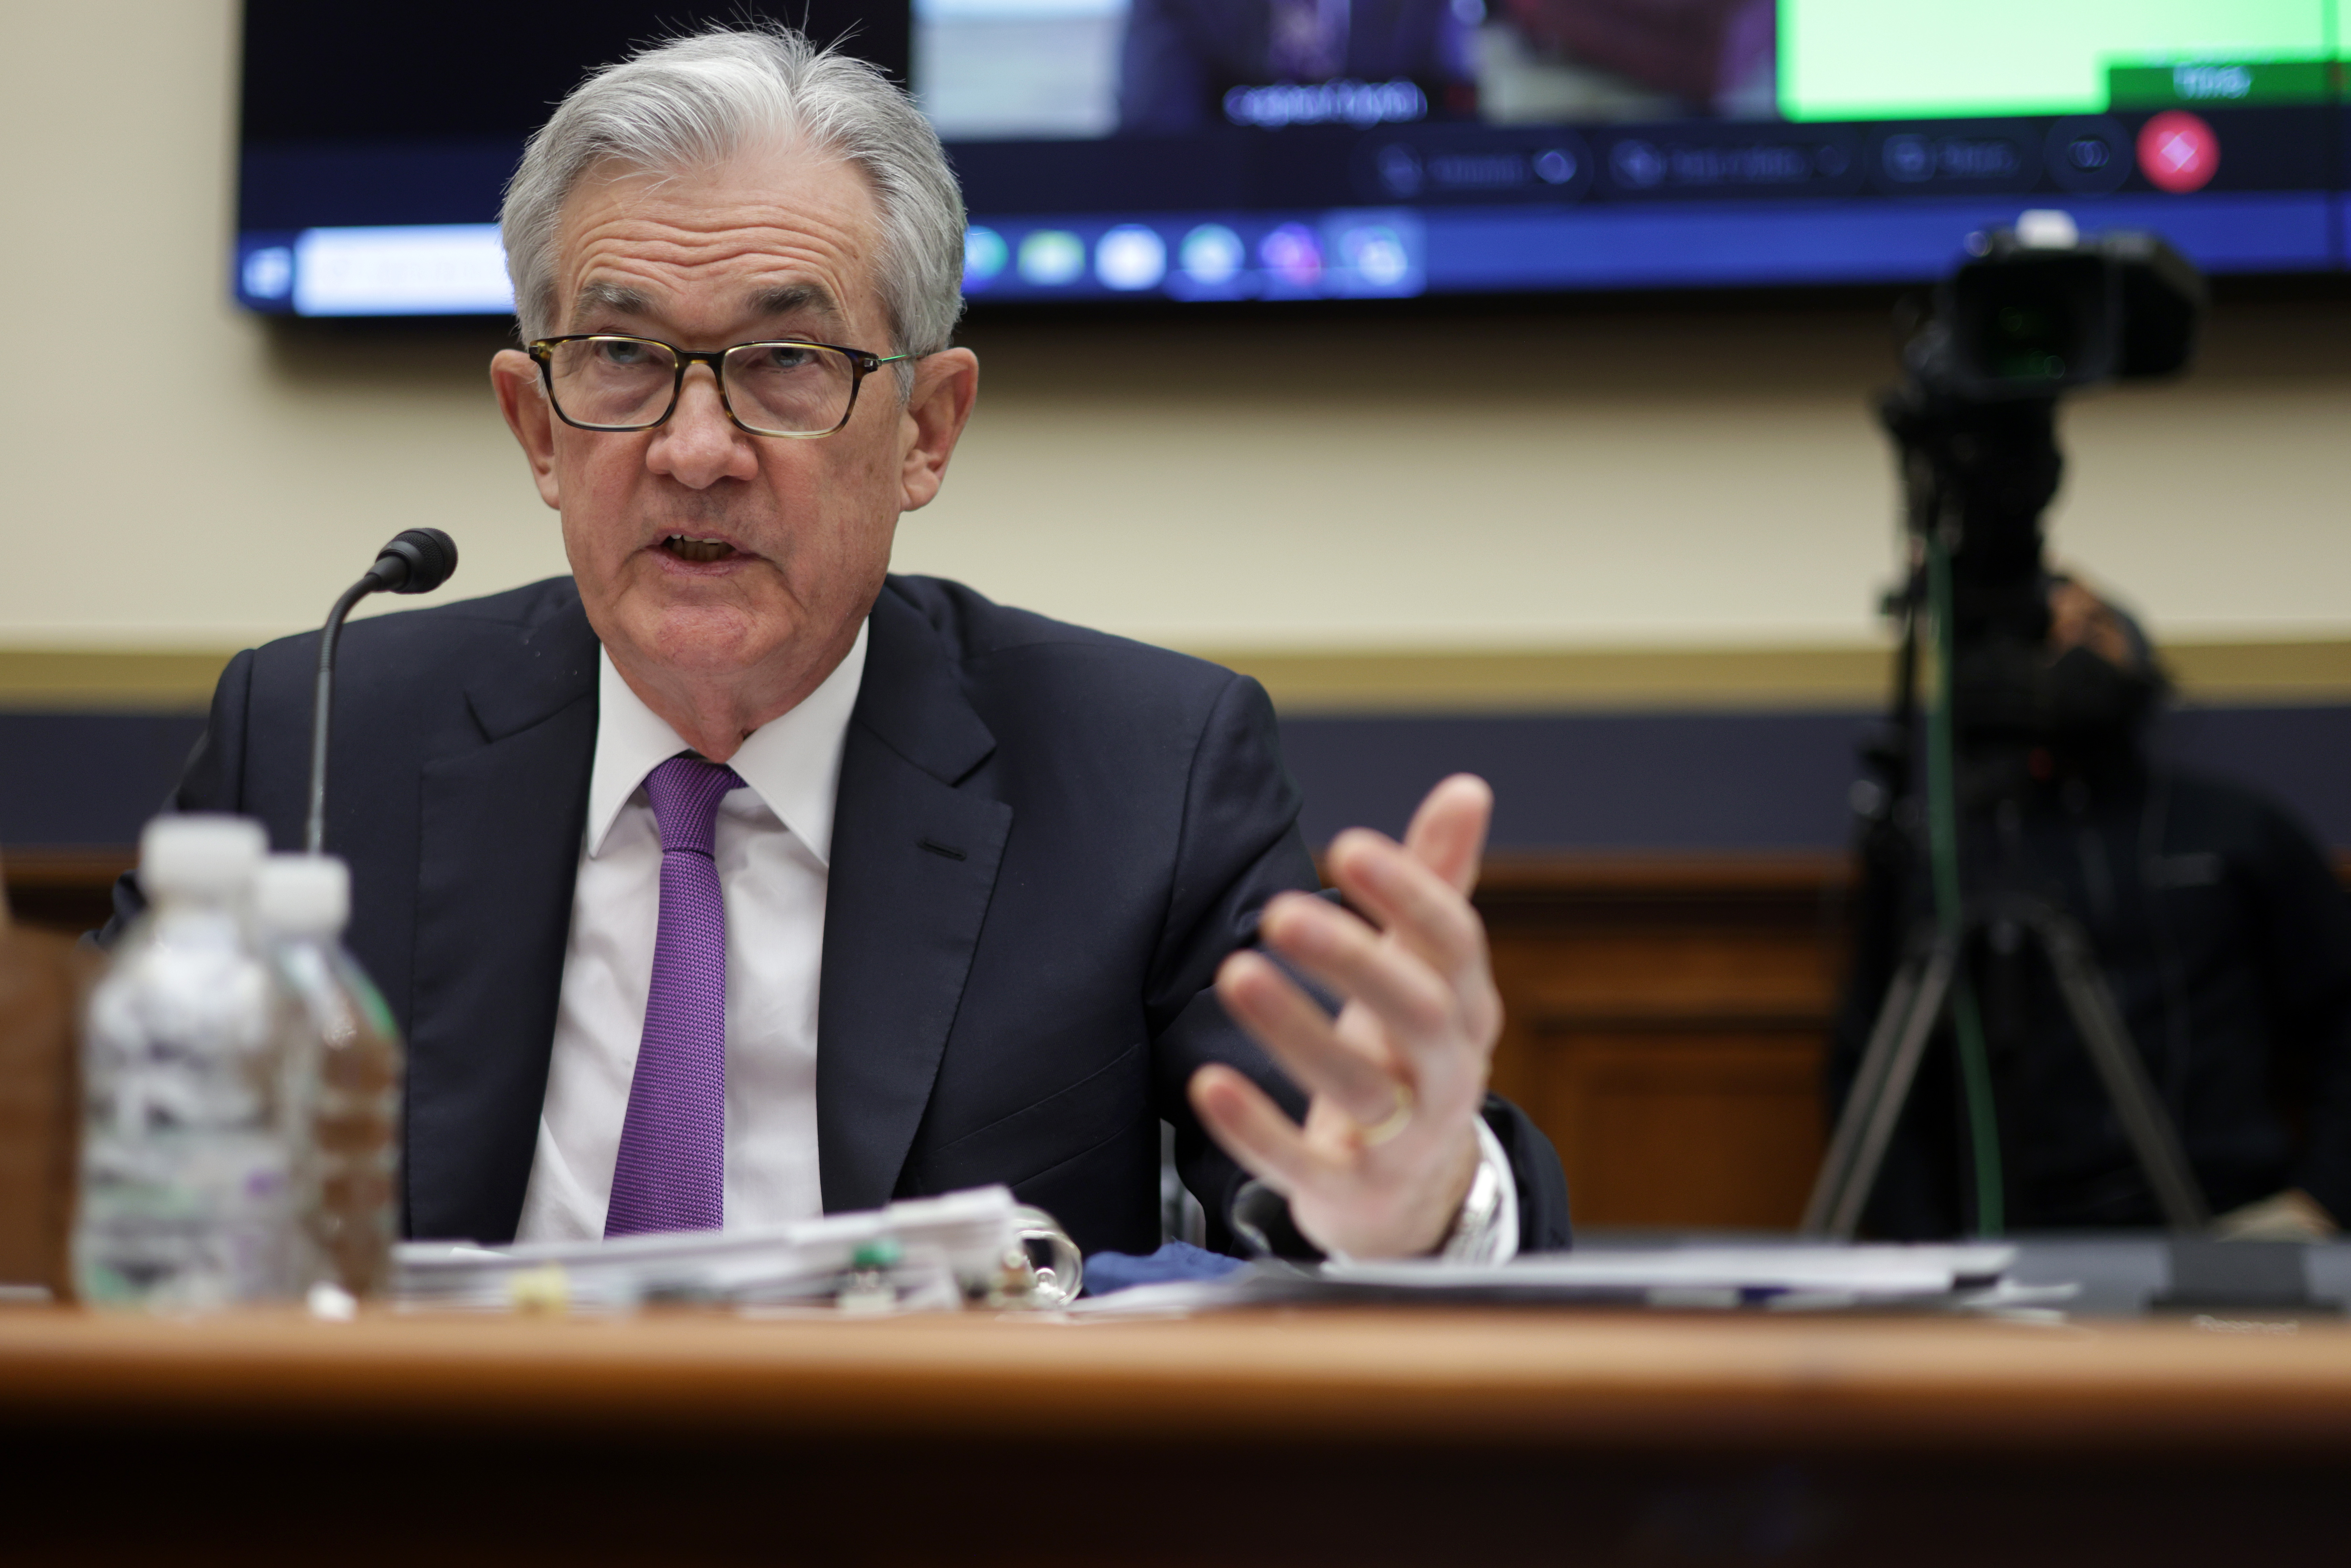 LIVE BLOG: Fed Chair Jerome Powell Appears Before the Senate Banking Committee